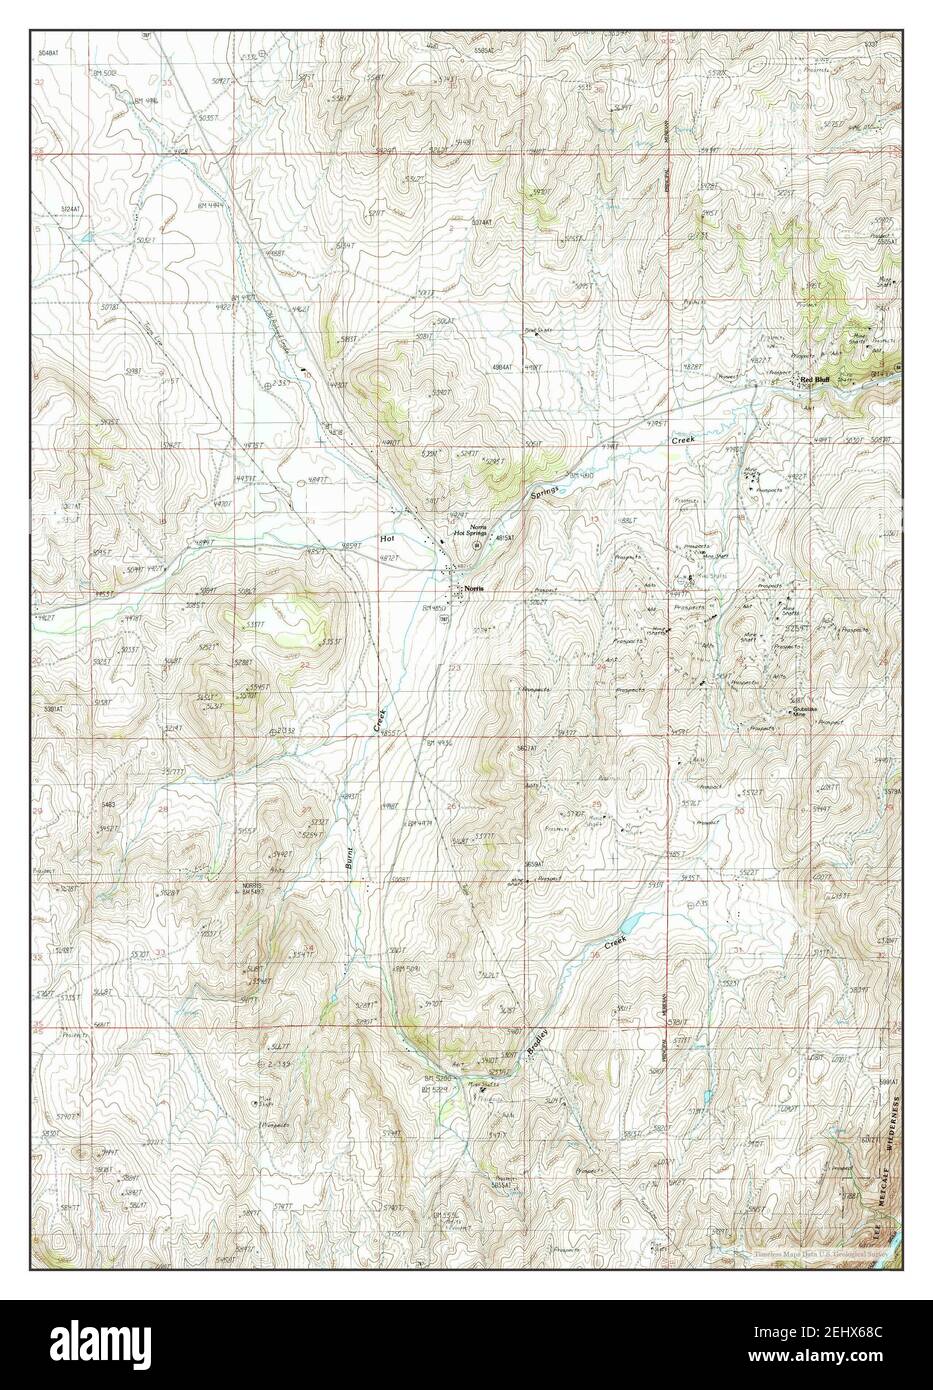 Norris, Montana, map 1988, 1:24000, United States of America by Timeless Maps, data U.S. Geological Survey Stock Photo